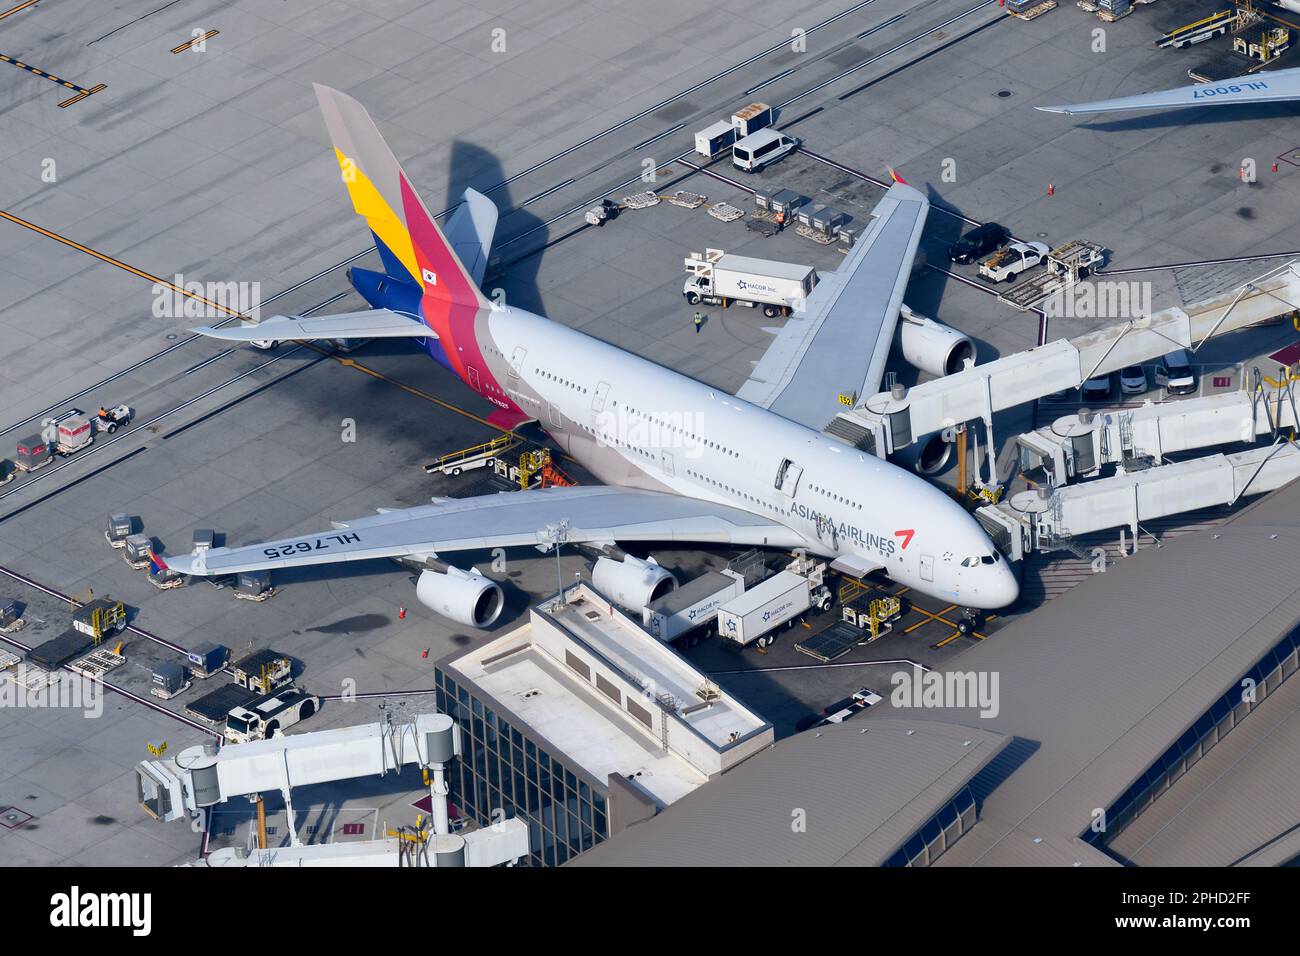 Asiana Airlines Airbus A380 airplane parked seen from above. Aircraft A380-800 of Asiana Airlines registered as HL7625 aerial view. Stock Photo